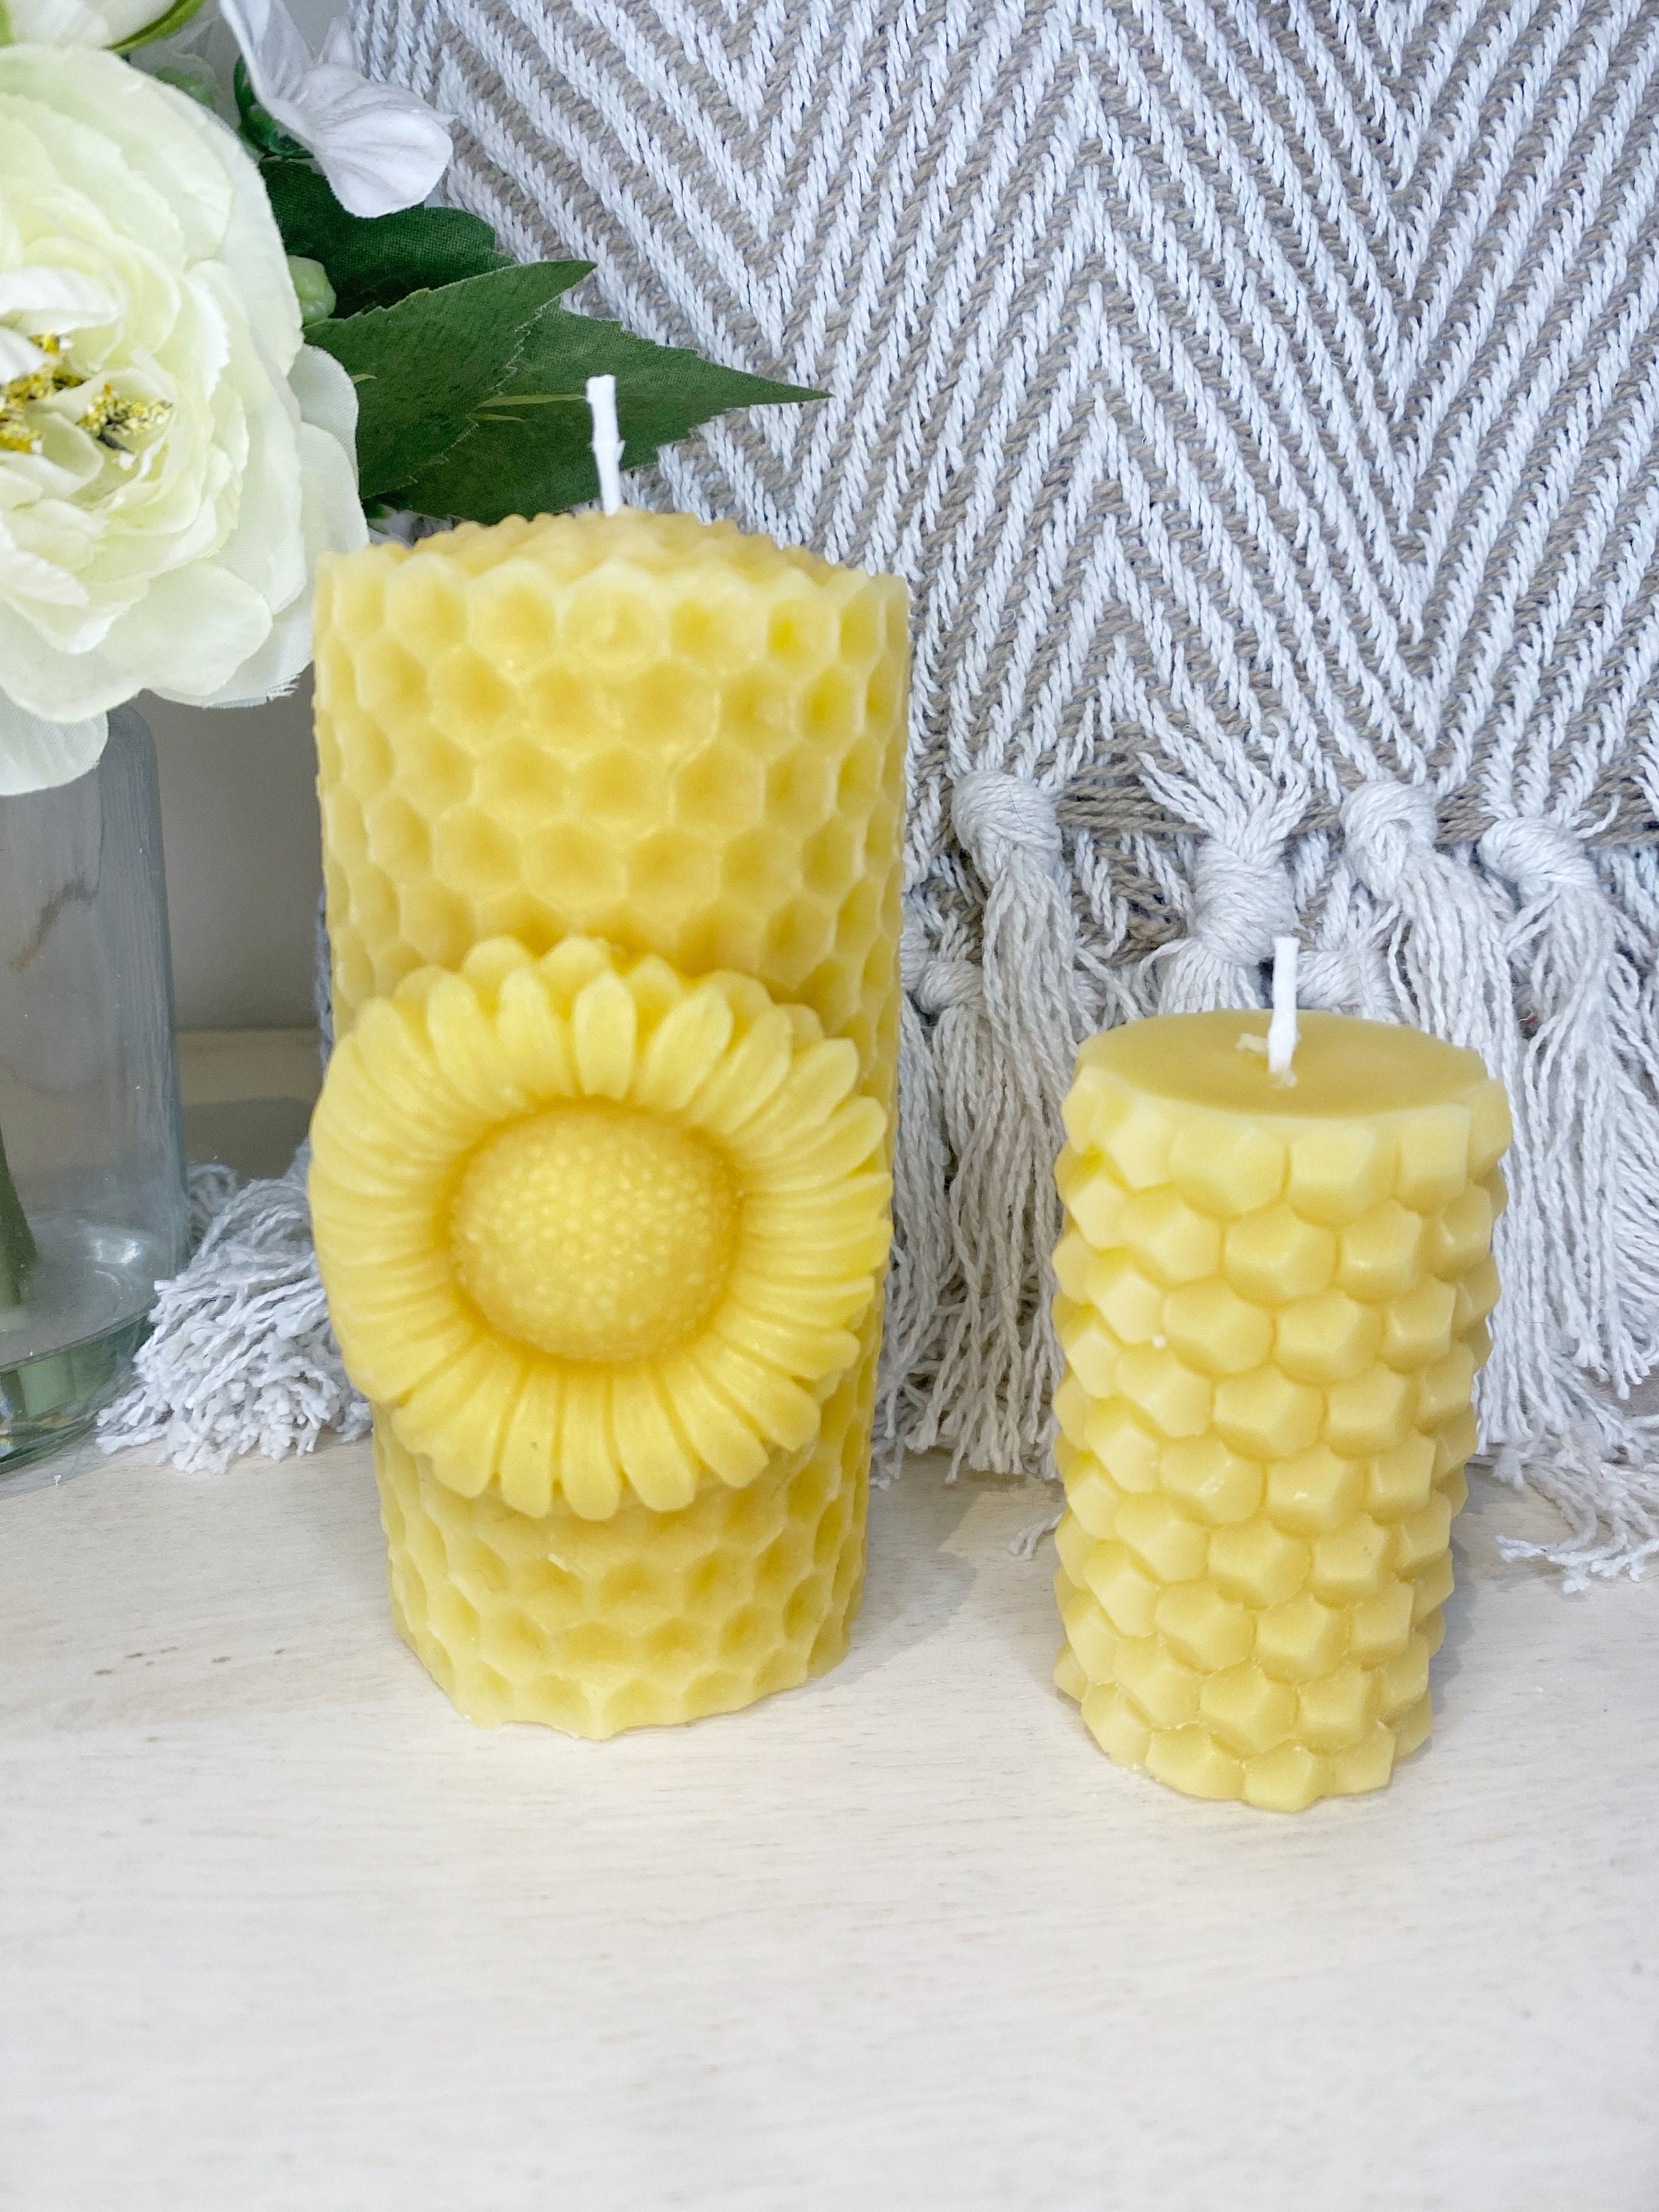 62 Beeswax modeling and decorated candles ideas